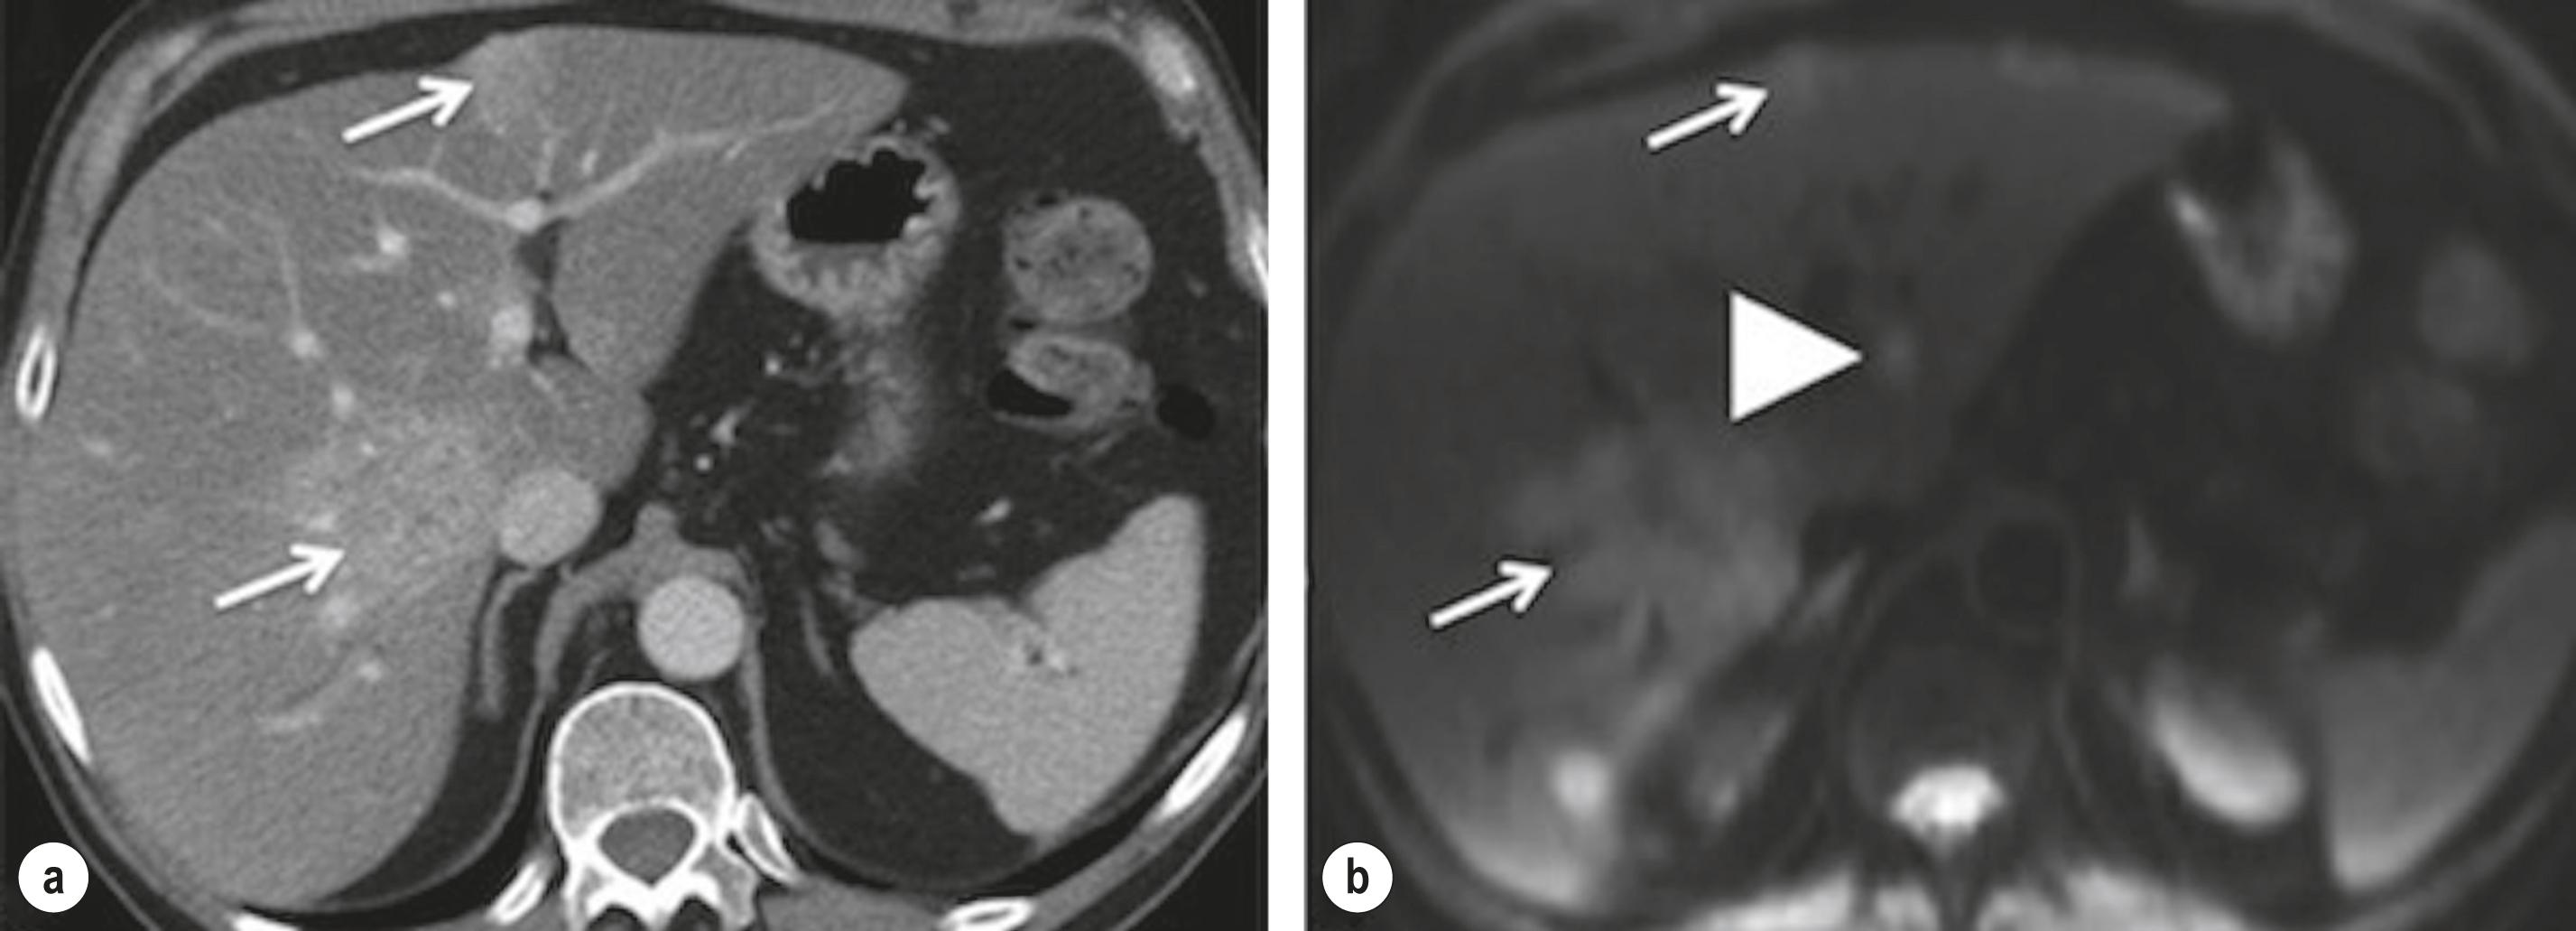 Figure 7.1, (a) Axial contrast-enhanced portal venous phase computed tomography of the liver shows the presence of two metastases (thin arrows) ; (b) diffusion MRI (b = 100 s/mm 2 ): identification of an additional metastasis in segment 2 (arrowhead).